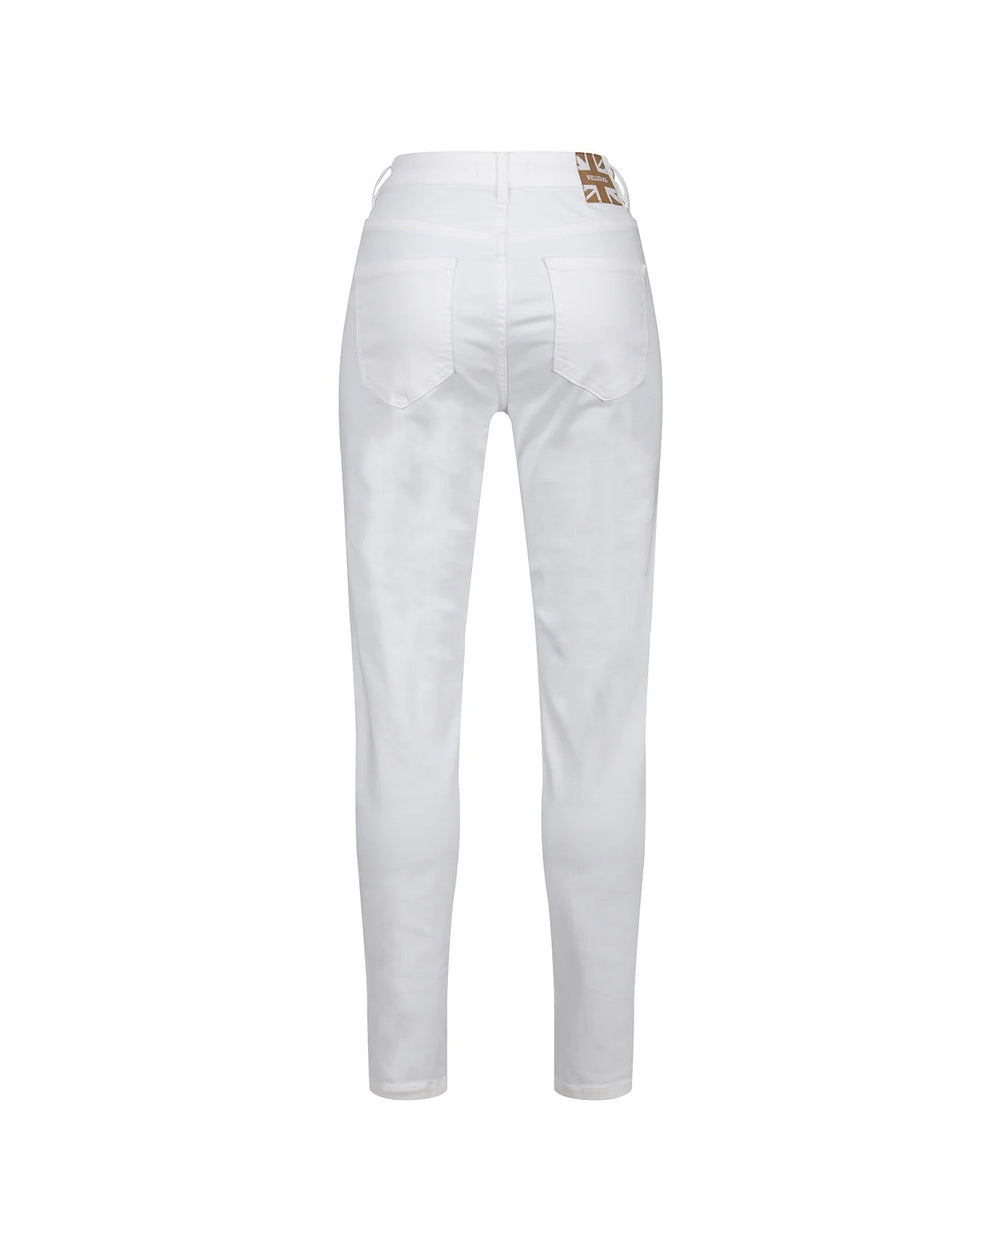 Our high waisted women's jeans will be a constant go to. A classic basic that can be paired with almost any look. The stretch cotton provides freedom of movement whilst the high waisted style elongates the leg. Extra comfortable in a straight leg style with our signature WG flag at the back. These come up on the roomier side so if you are in between sizes, we recommend going down.